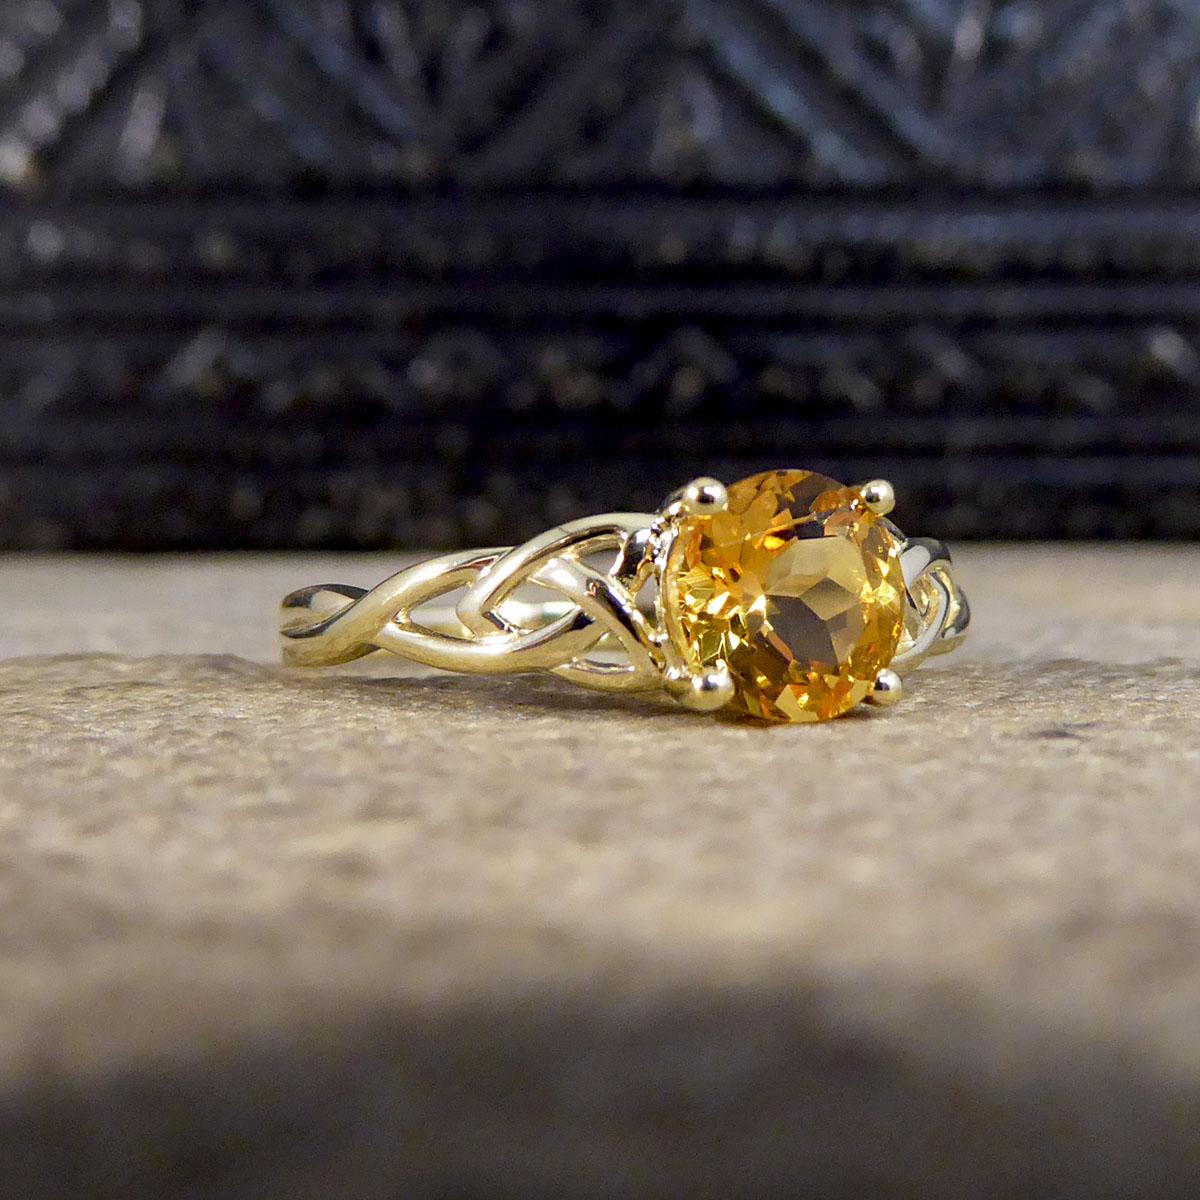 This lovely Contemporary ring has been crafted with a beautifully detailed shoulder leading down to the band that is all crafted in 9ct Yellow Gold. It features a Round cut Citrine in the centre, and is the perfect simple yet beautiful style.

Ring